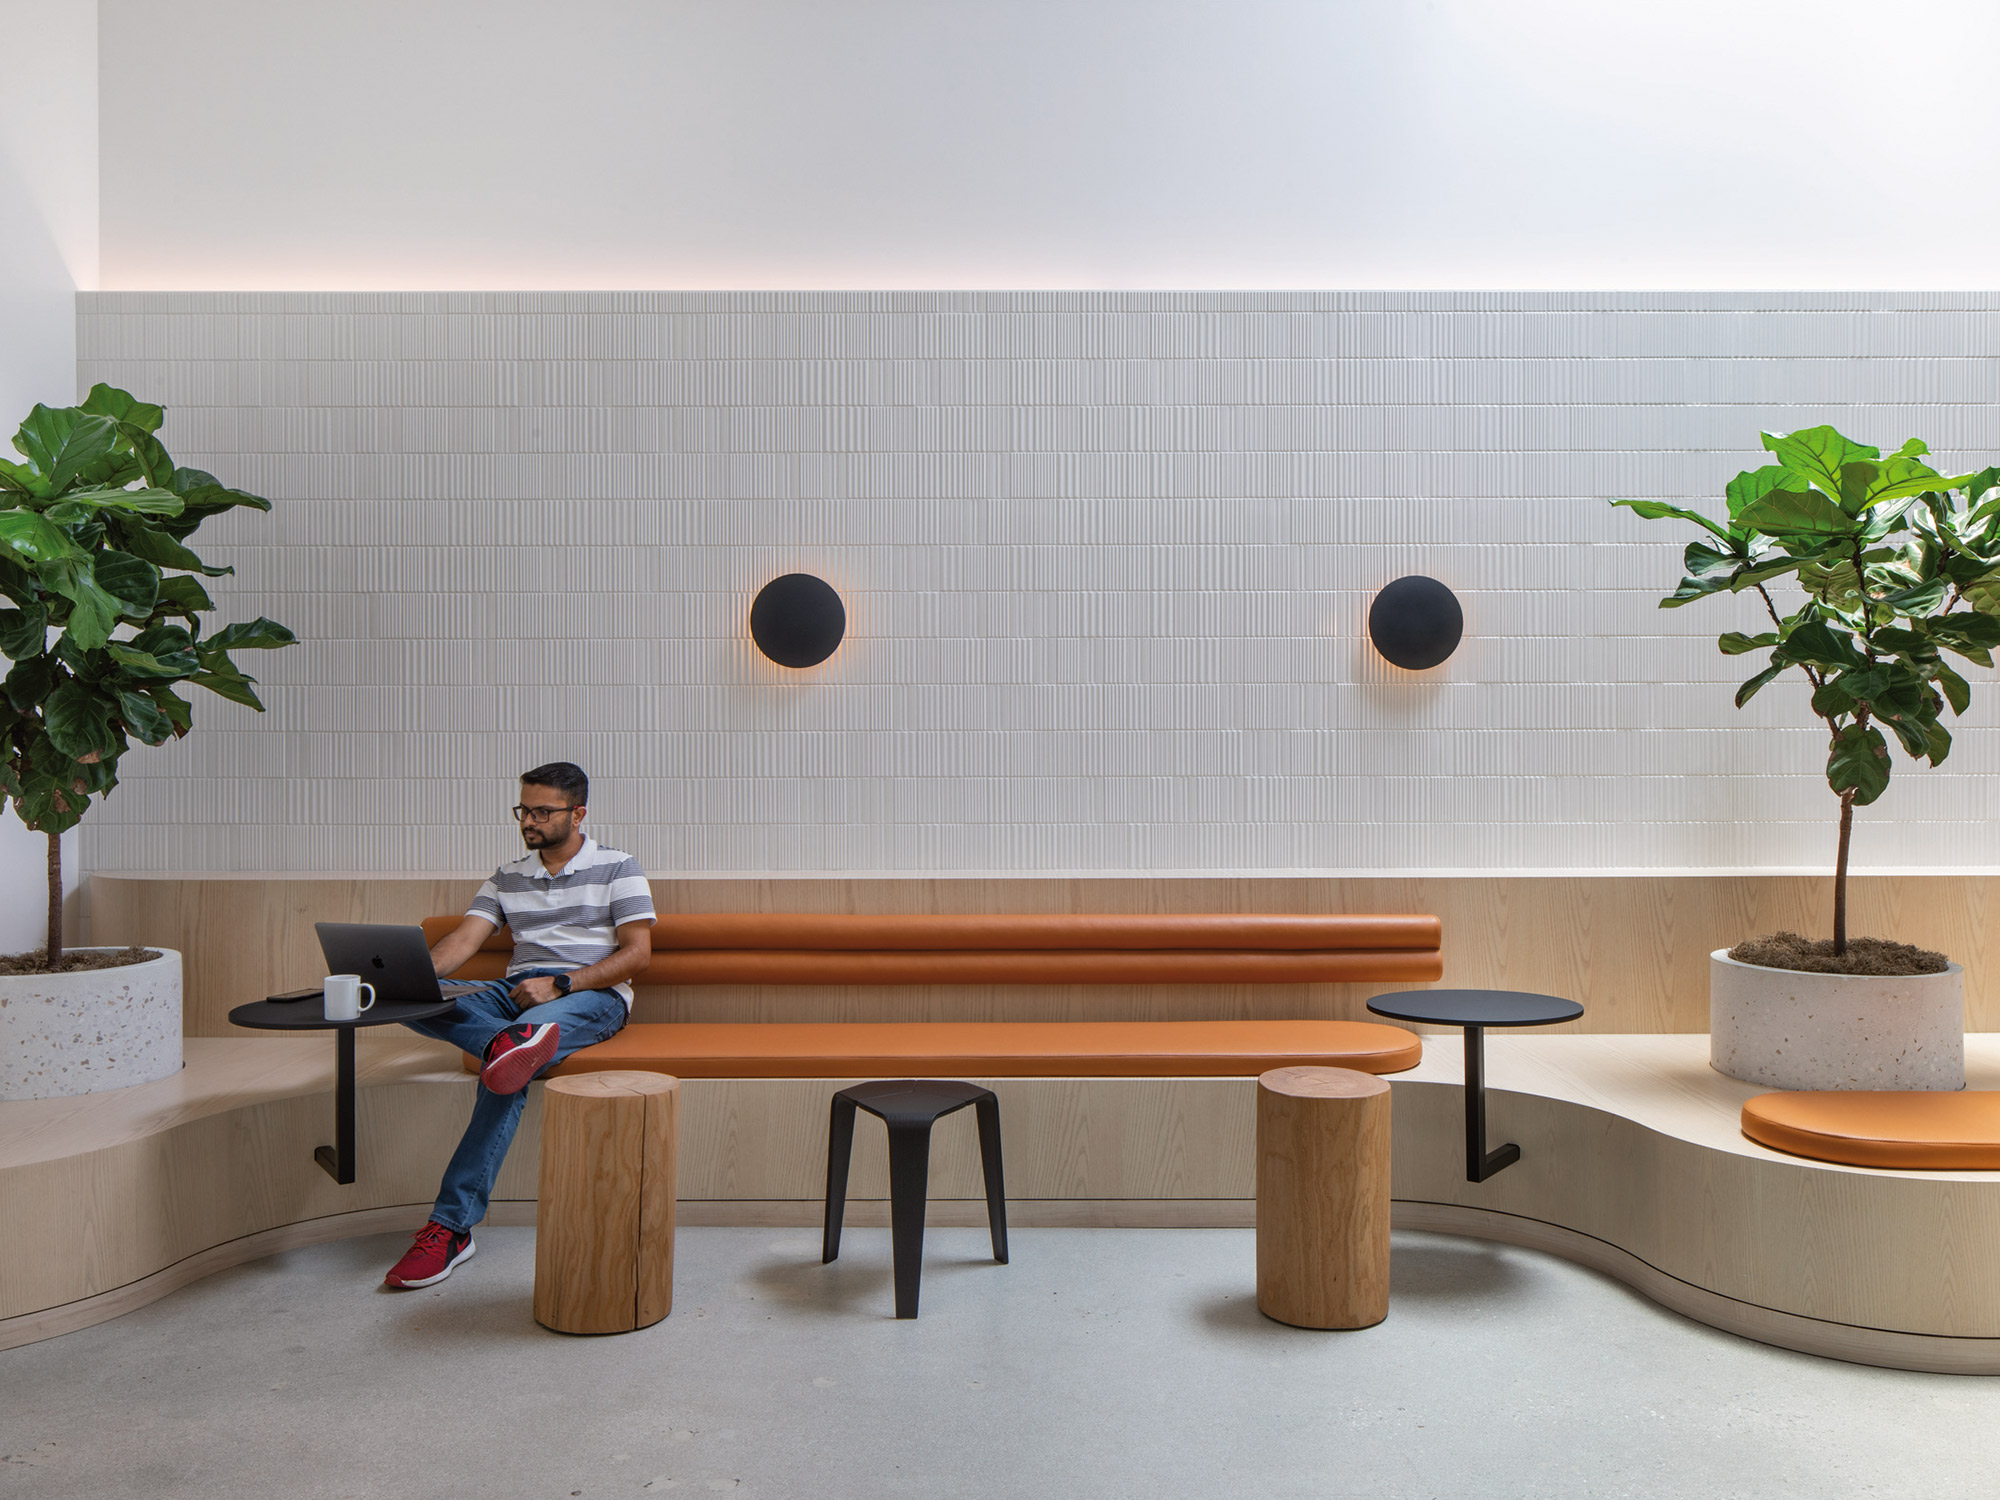 A man in casual attire enjoys a moment of solitude with his laptop on a sleek, modern bench in a stylishly minimalist cafe, flanked by potted green plants.